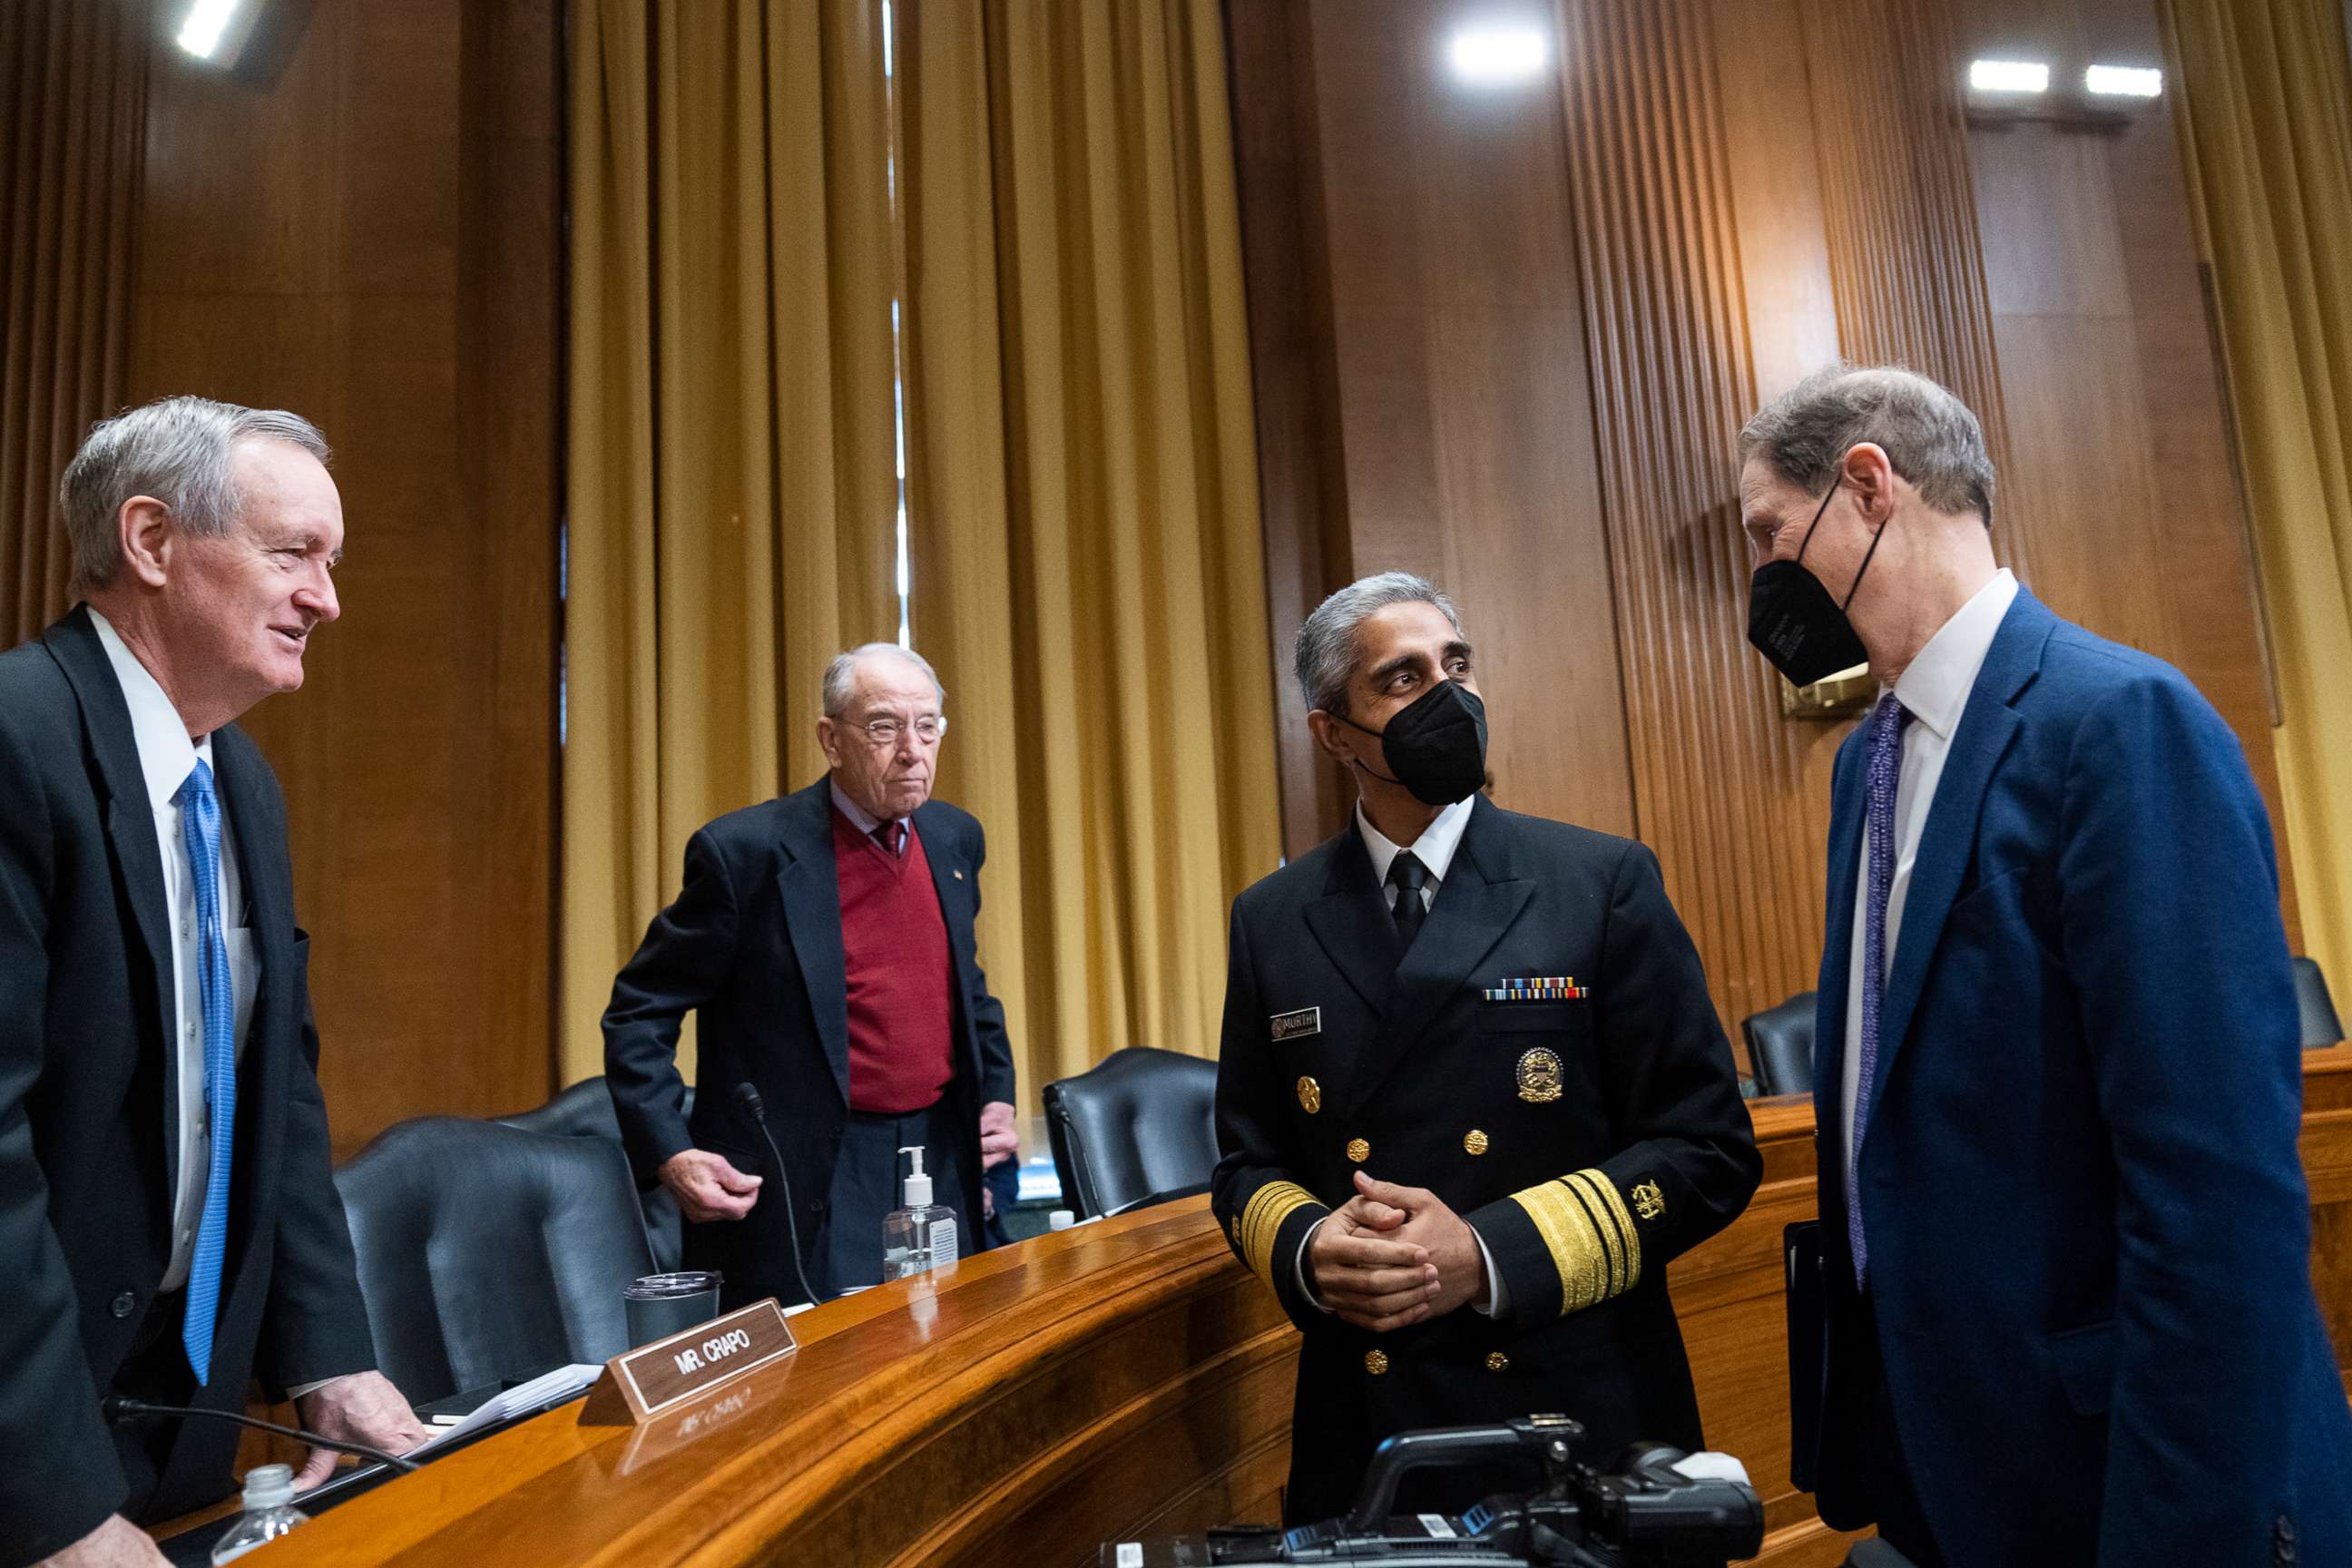 PHOTO: In this Feb. 8, 2022, file photo, from right, Chairman Ron Wyden, Surgeon General Vivek H. Murthy, Sen. Chuck Grassley, and Ranking member Sen. Mike Crapo, talk before the Senate Finance Committee hearing titled Protecting Youth Mental Health.